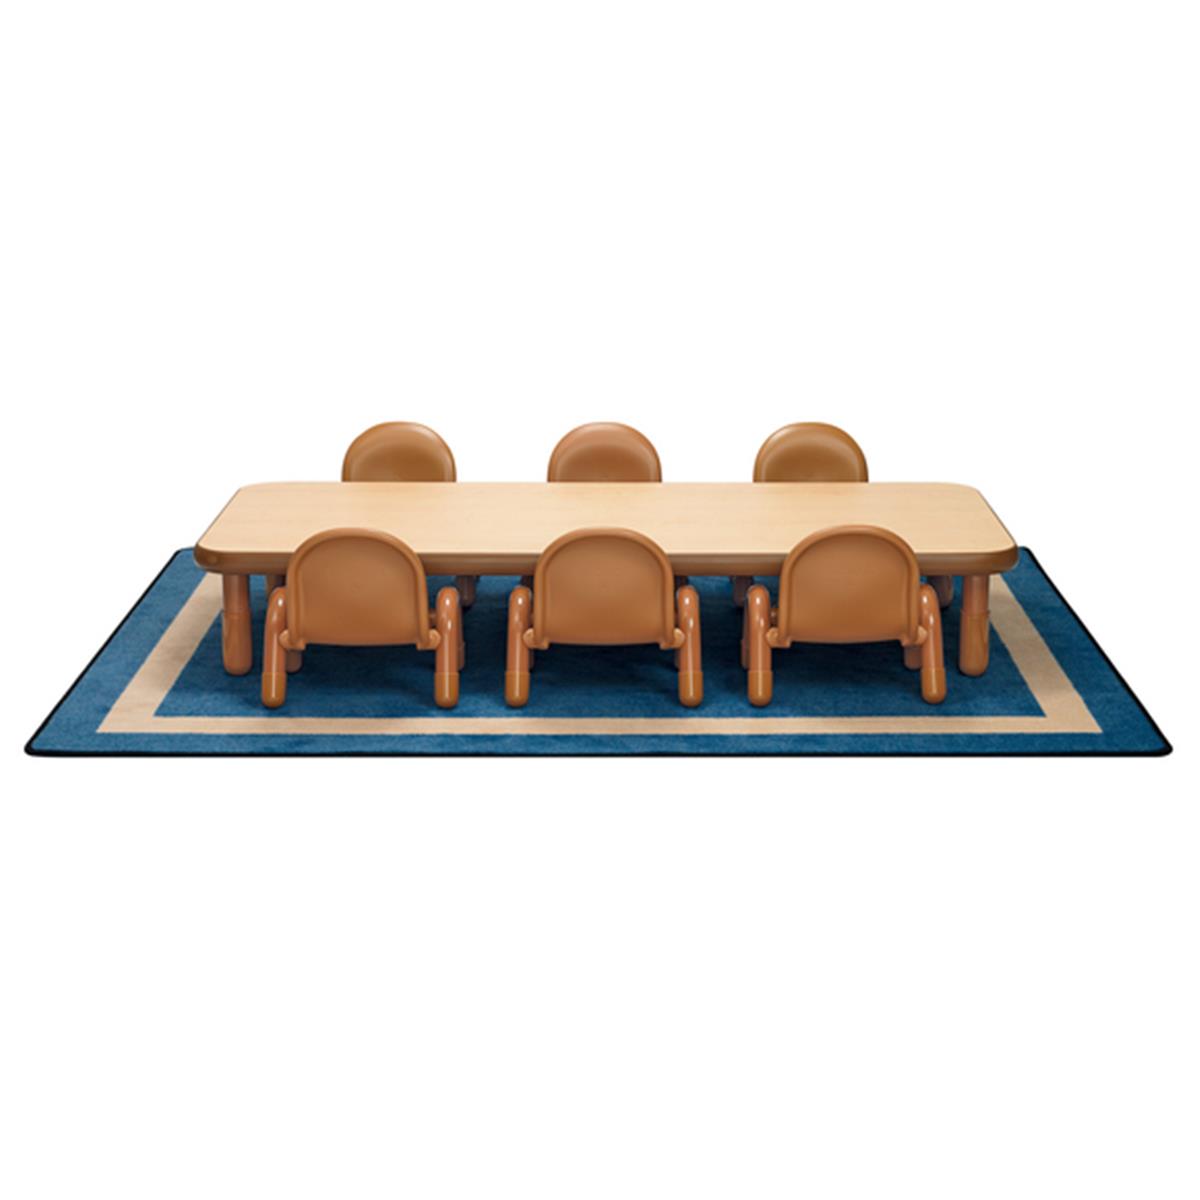 Ab74612nw5 30 X 60 X12 In. Baseline Rectangular Table & 6 Chair Set, Natural Wood - 5 In.